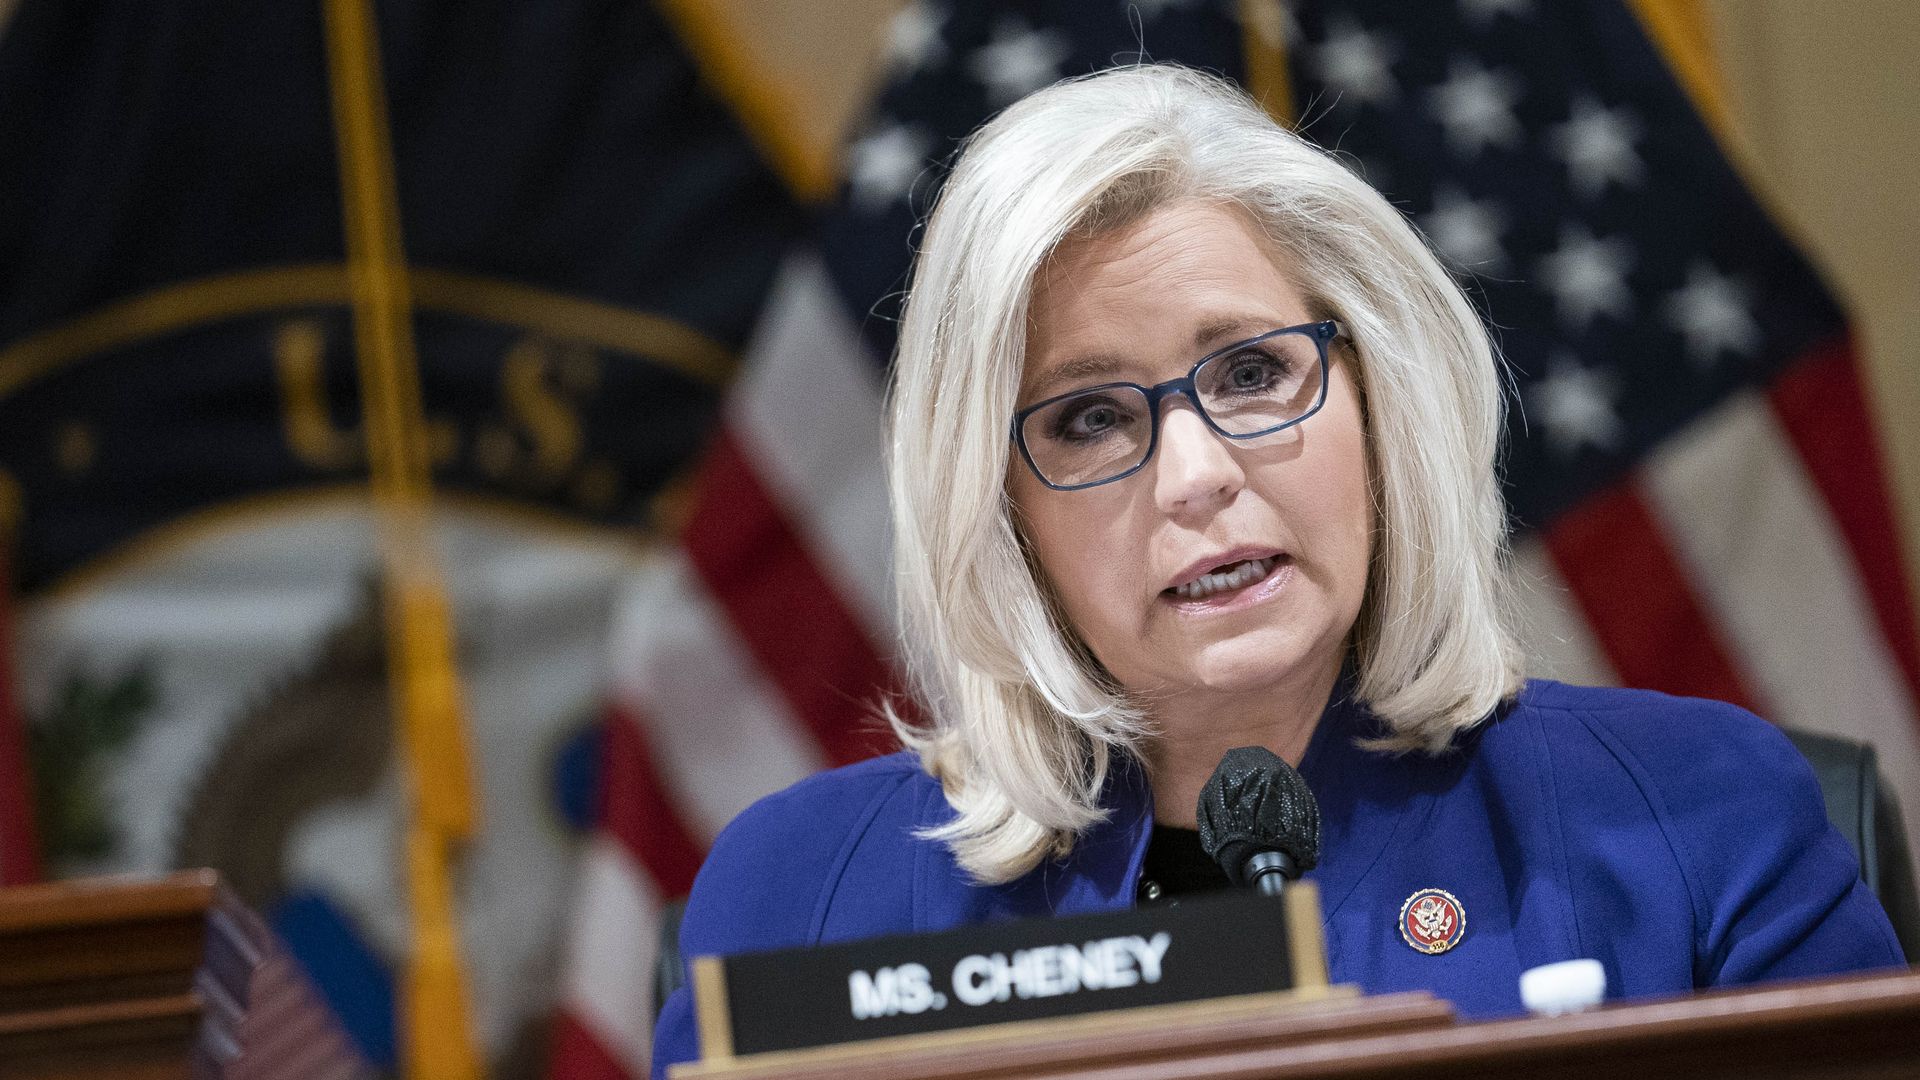 Rep. Liz Cheney speaking during a committee hearing in October 2021.